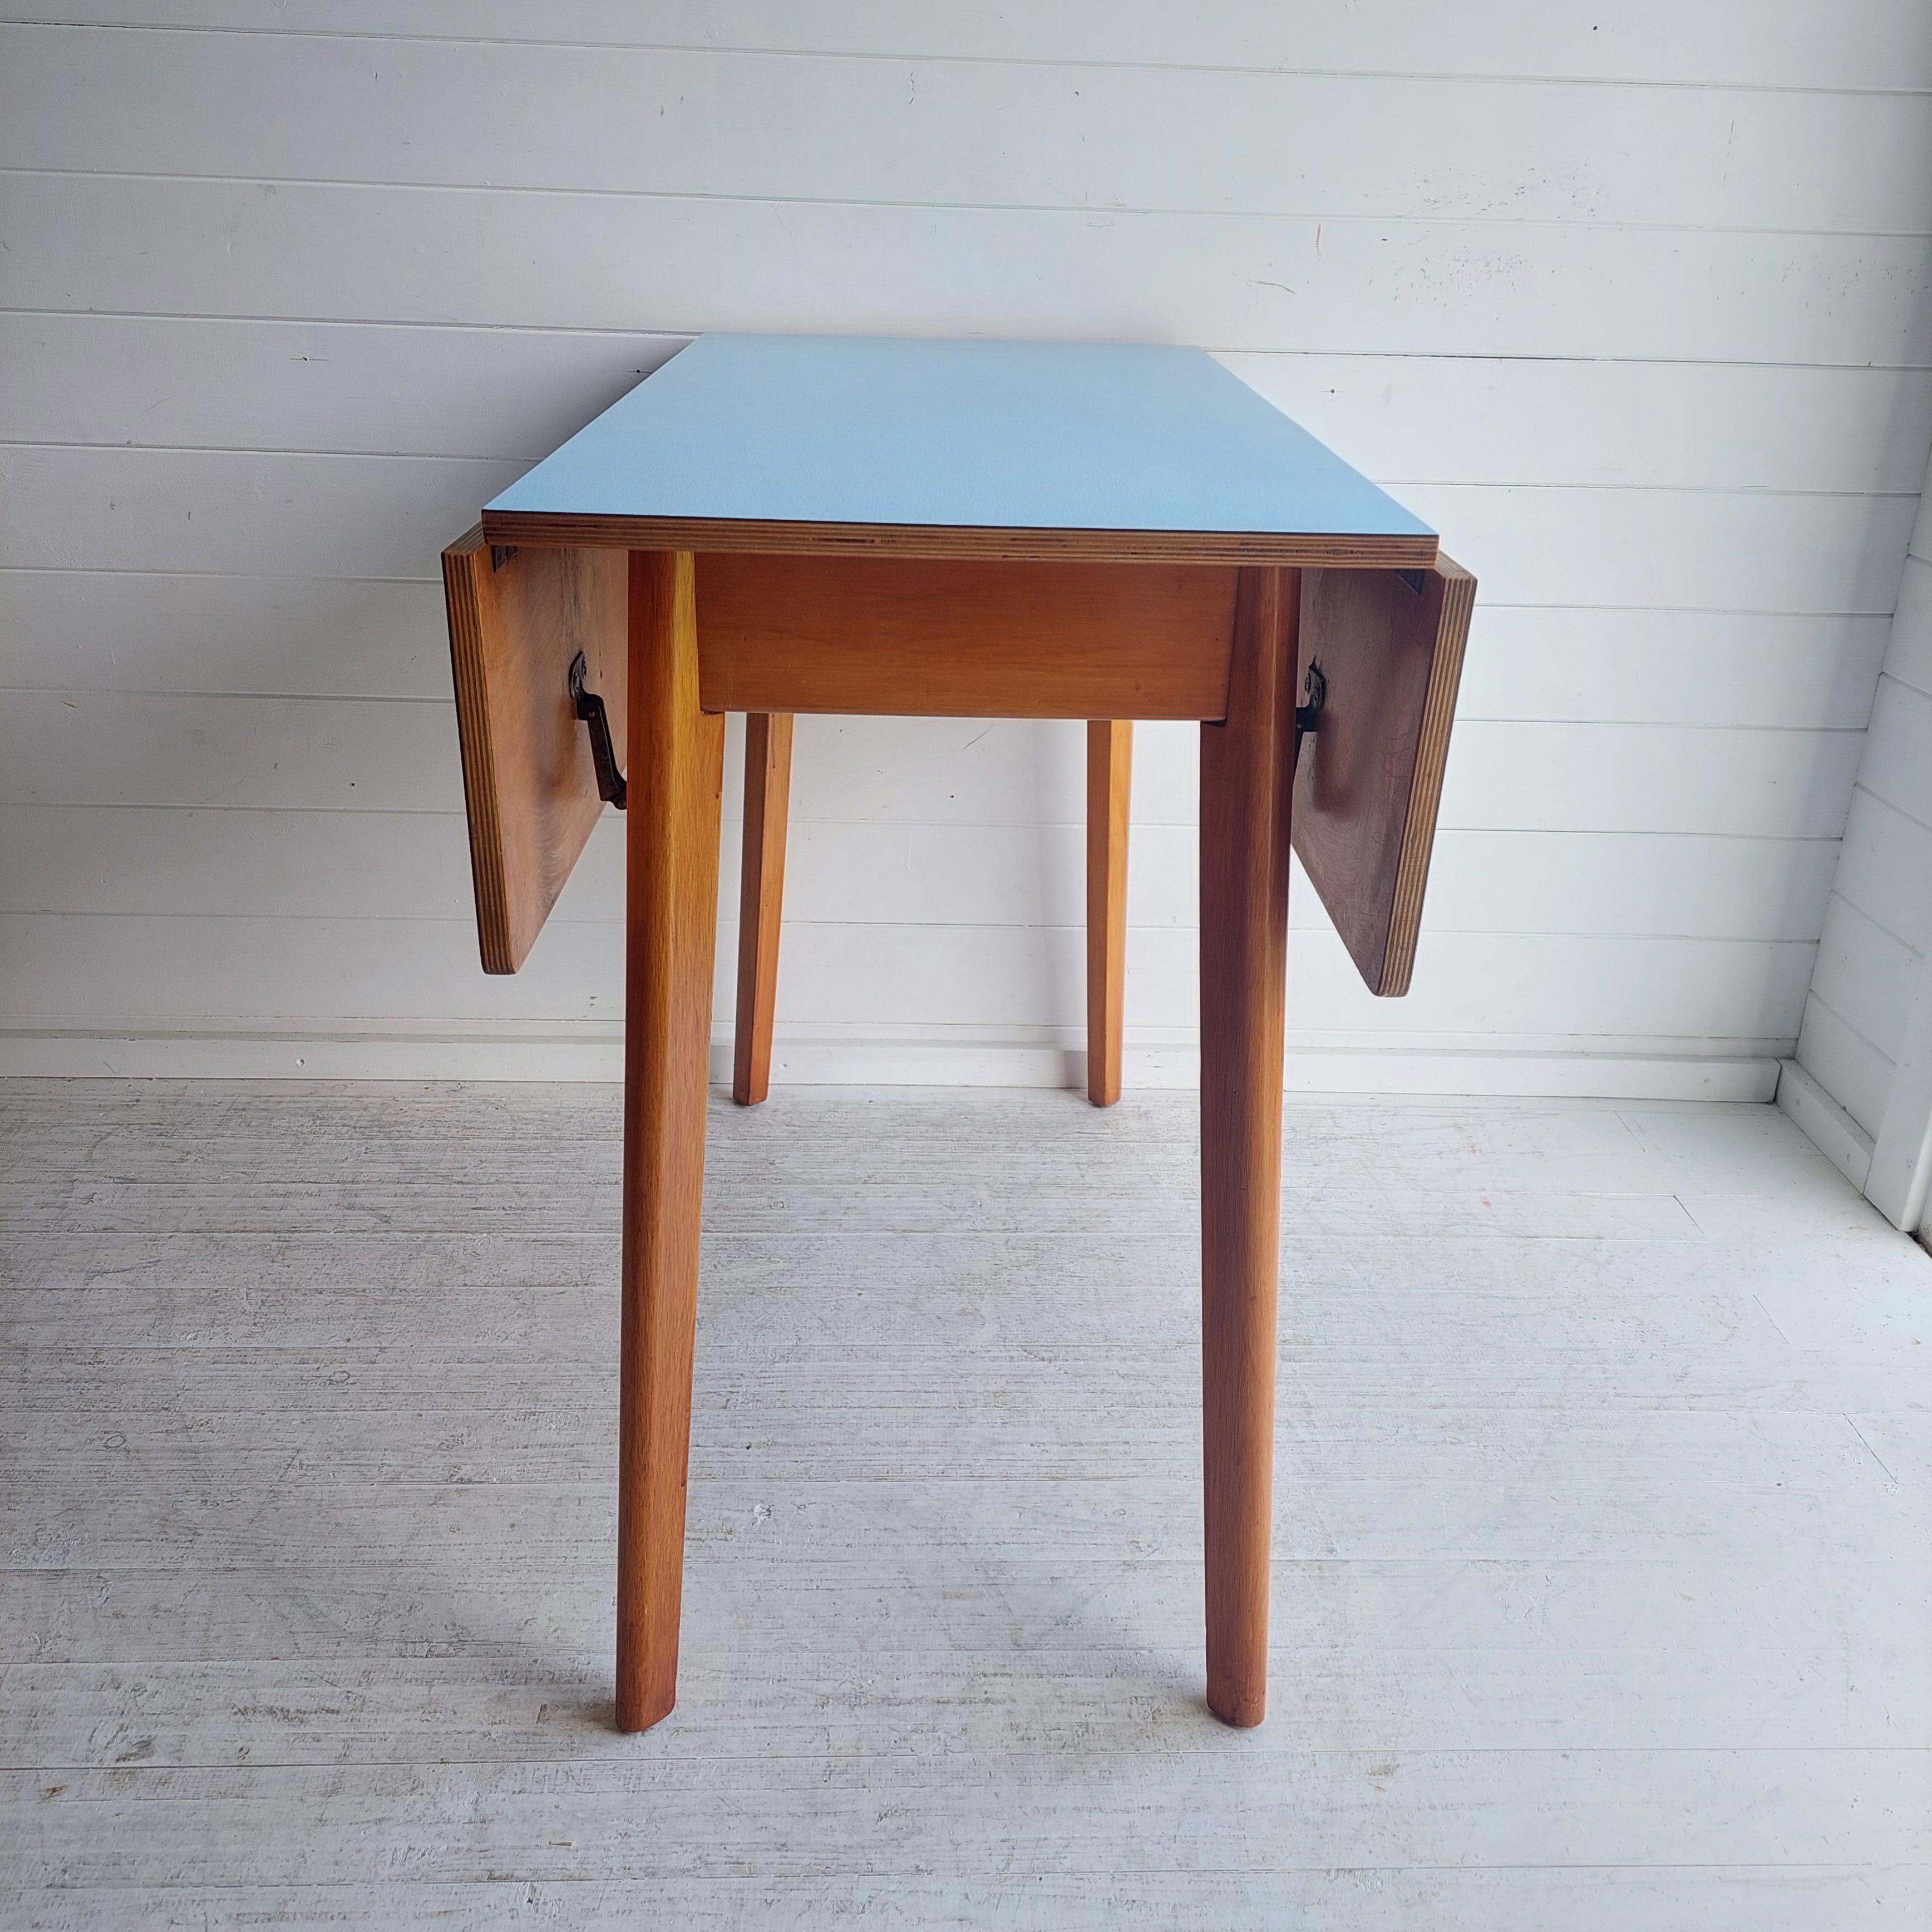 20th Century Mid Century Blue Formica Drop Leaf Kitchen Dining Table With Wooden Legs 60s For Sale